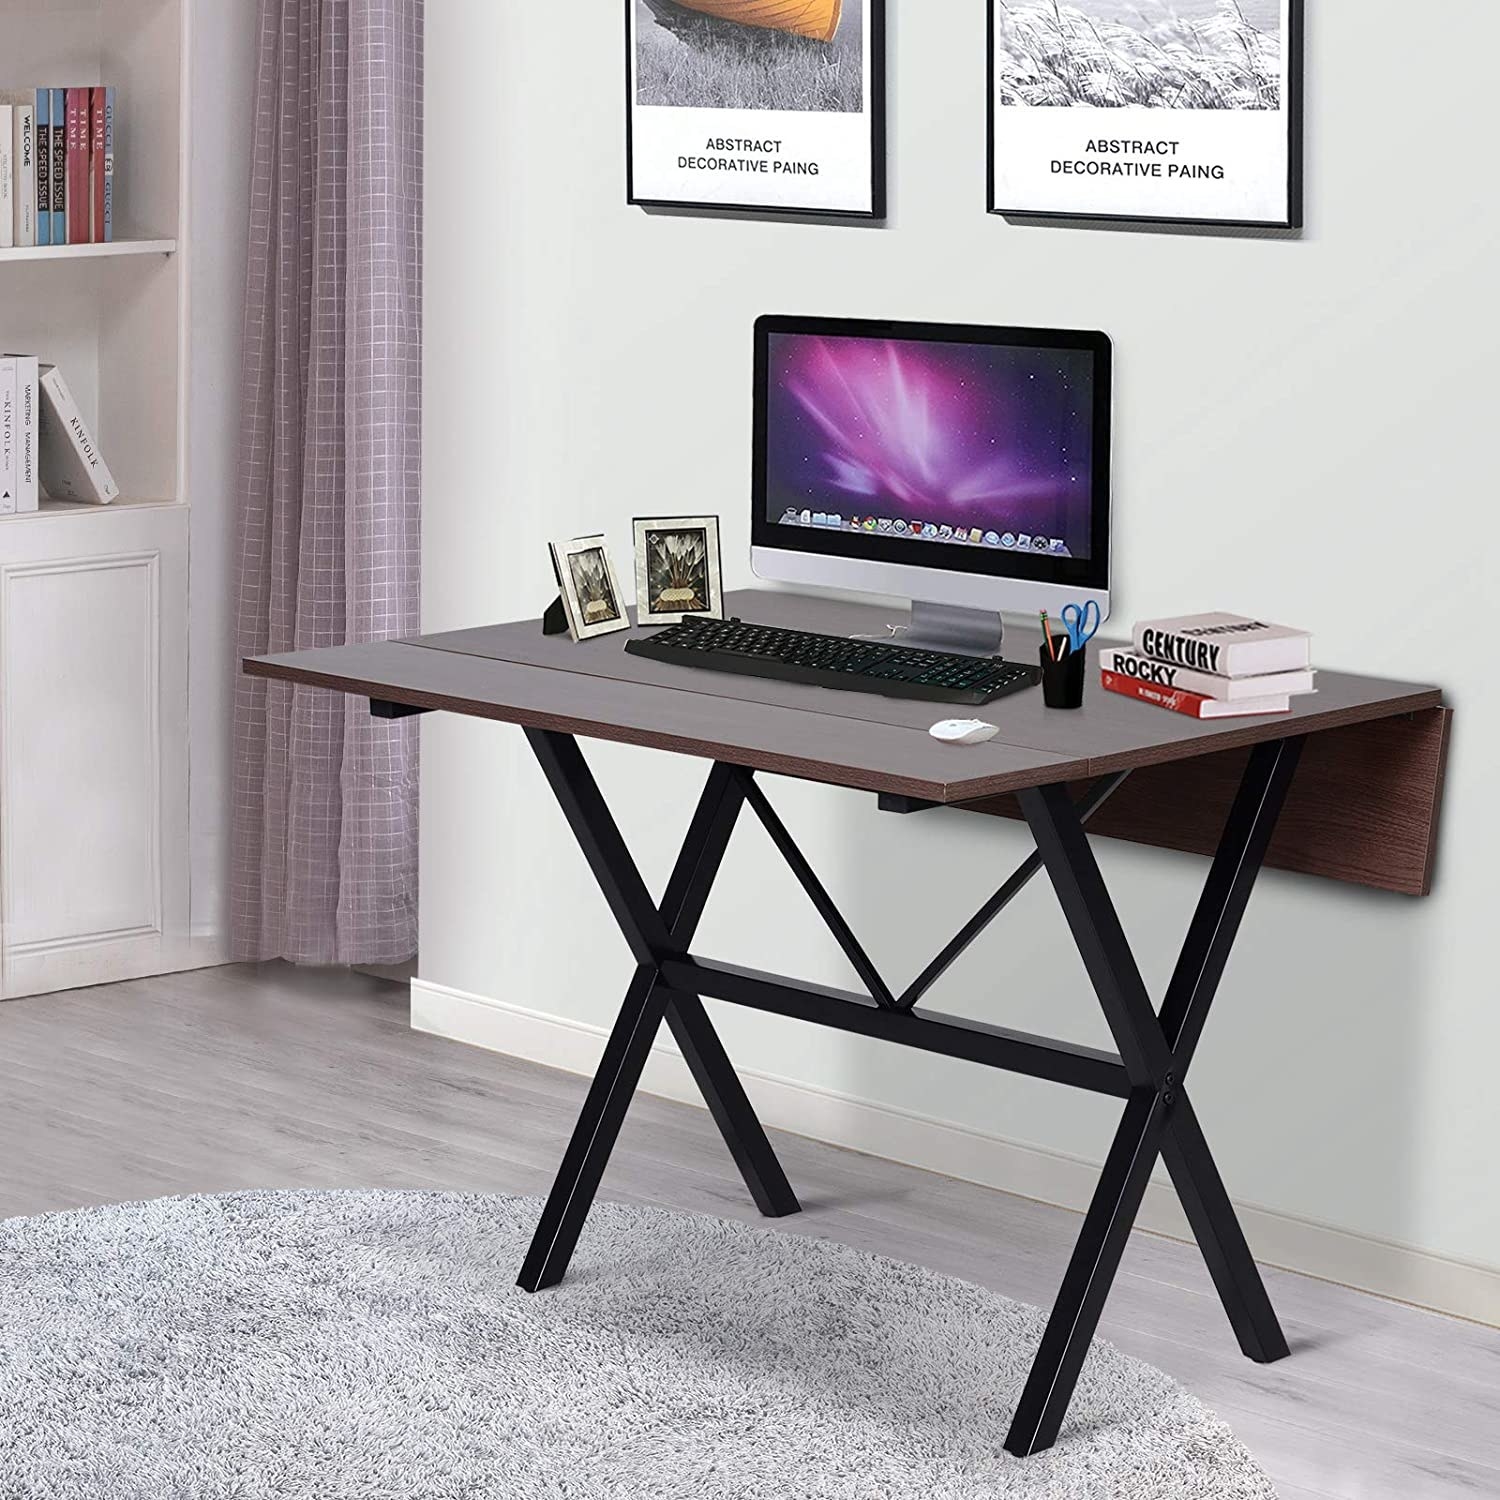 the drop-leaf table with one side folded down